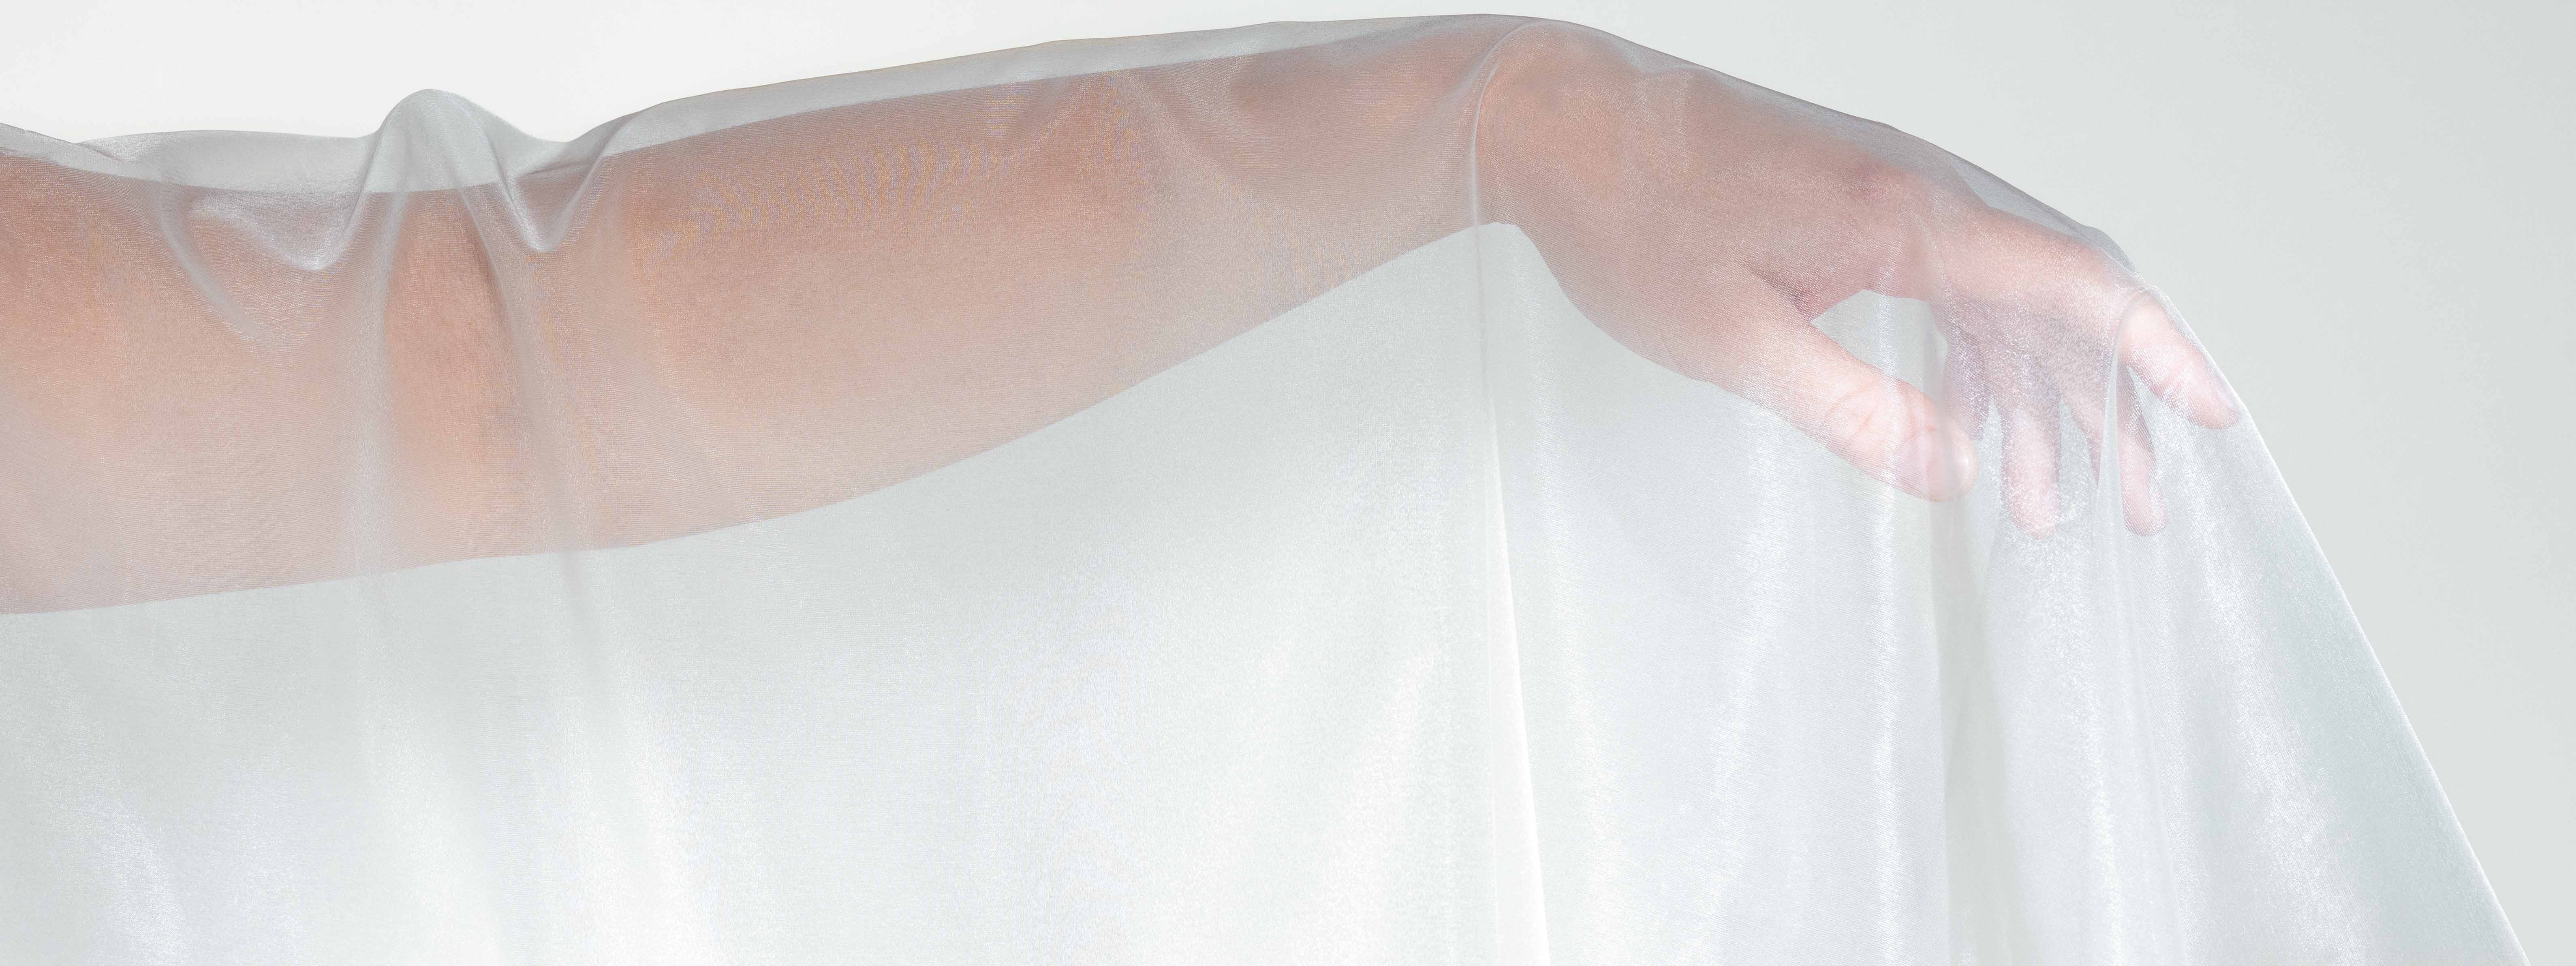 StageVoile CS: highly transparent sheer fabric with a decorative